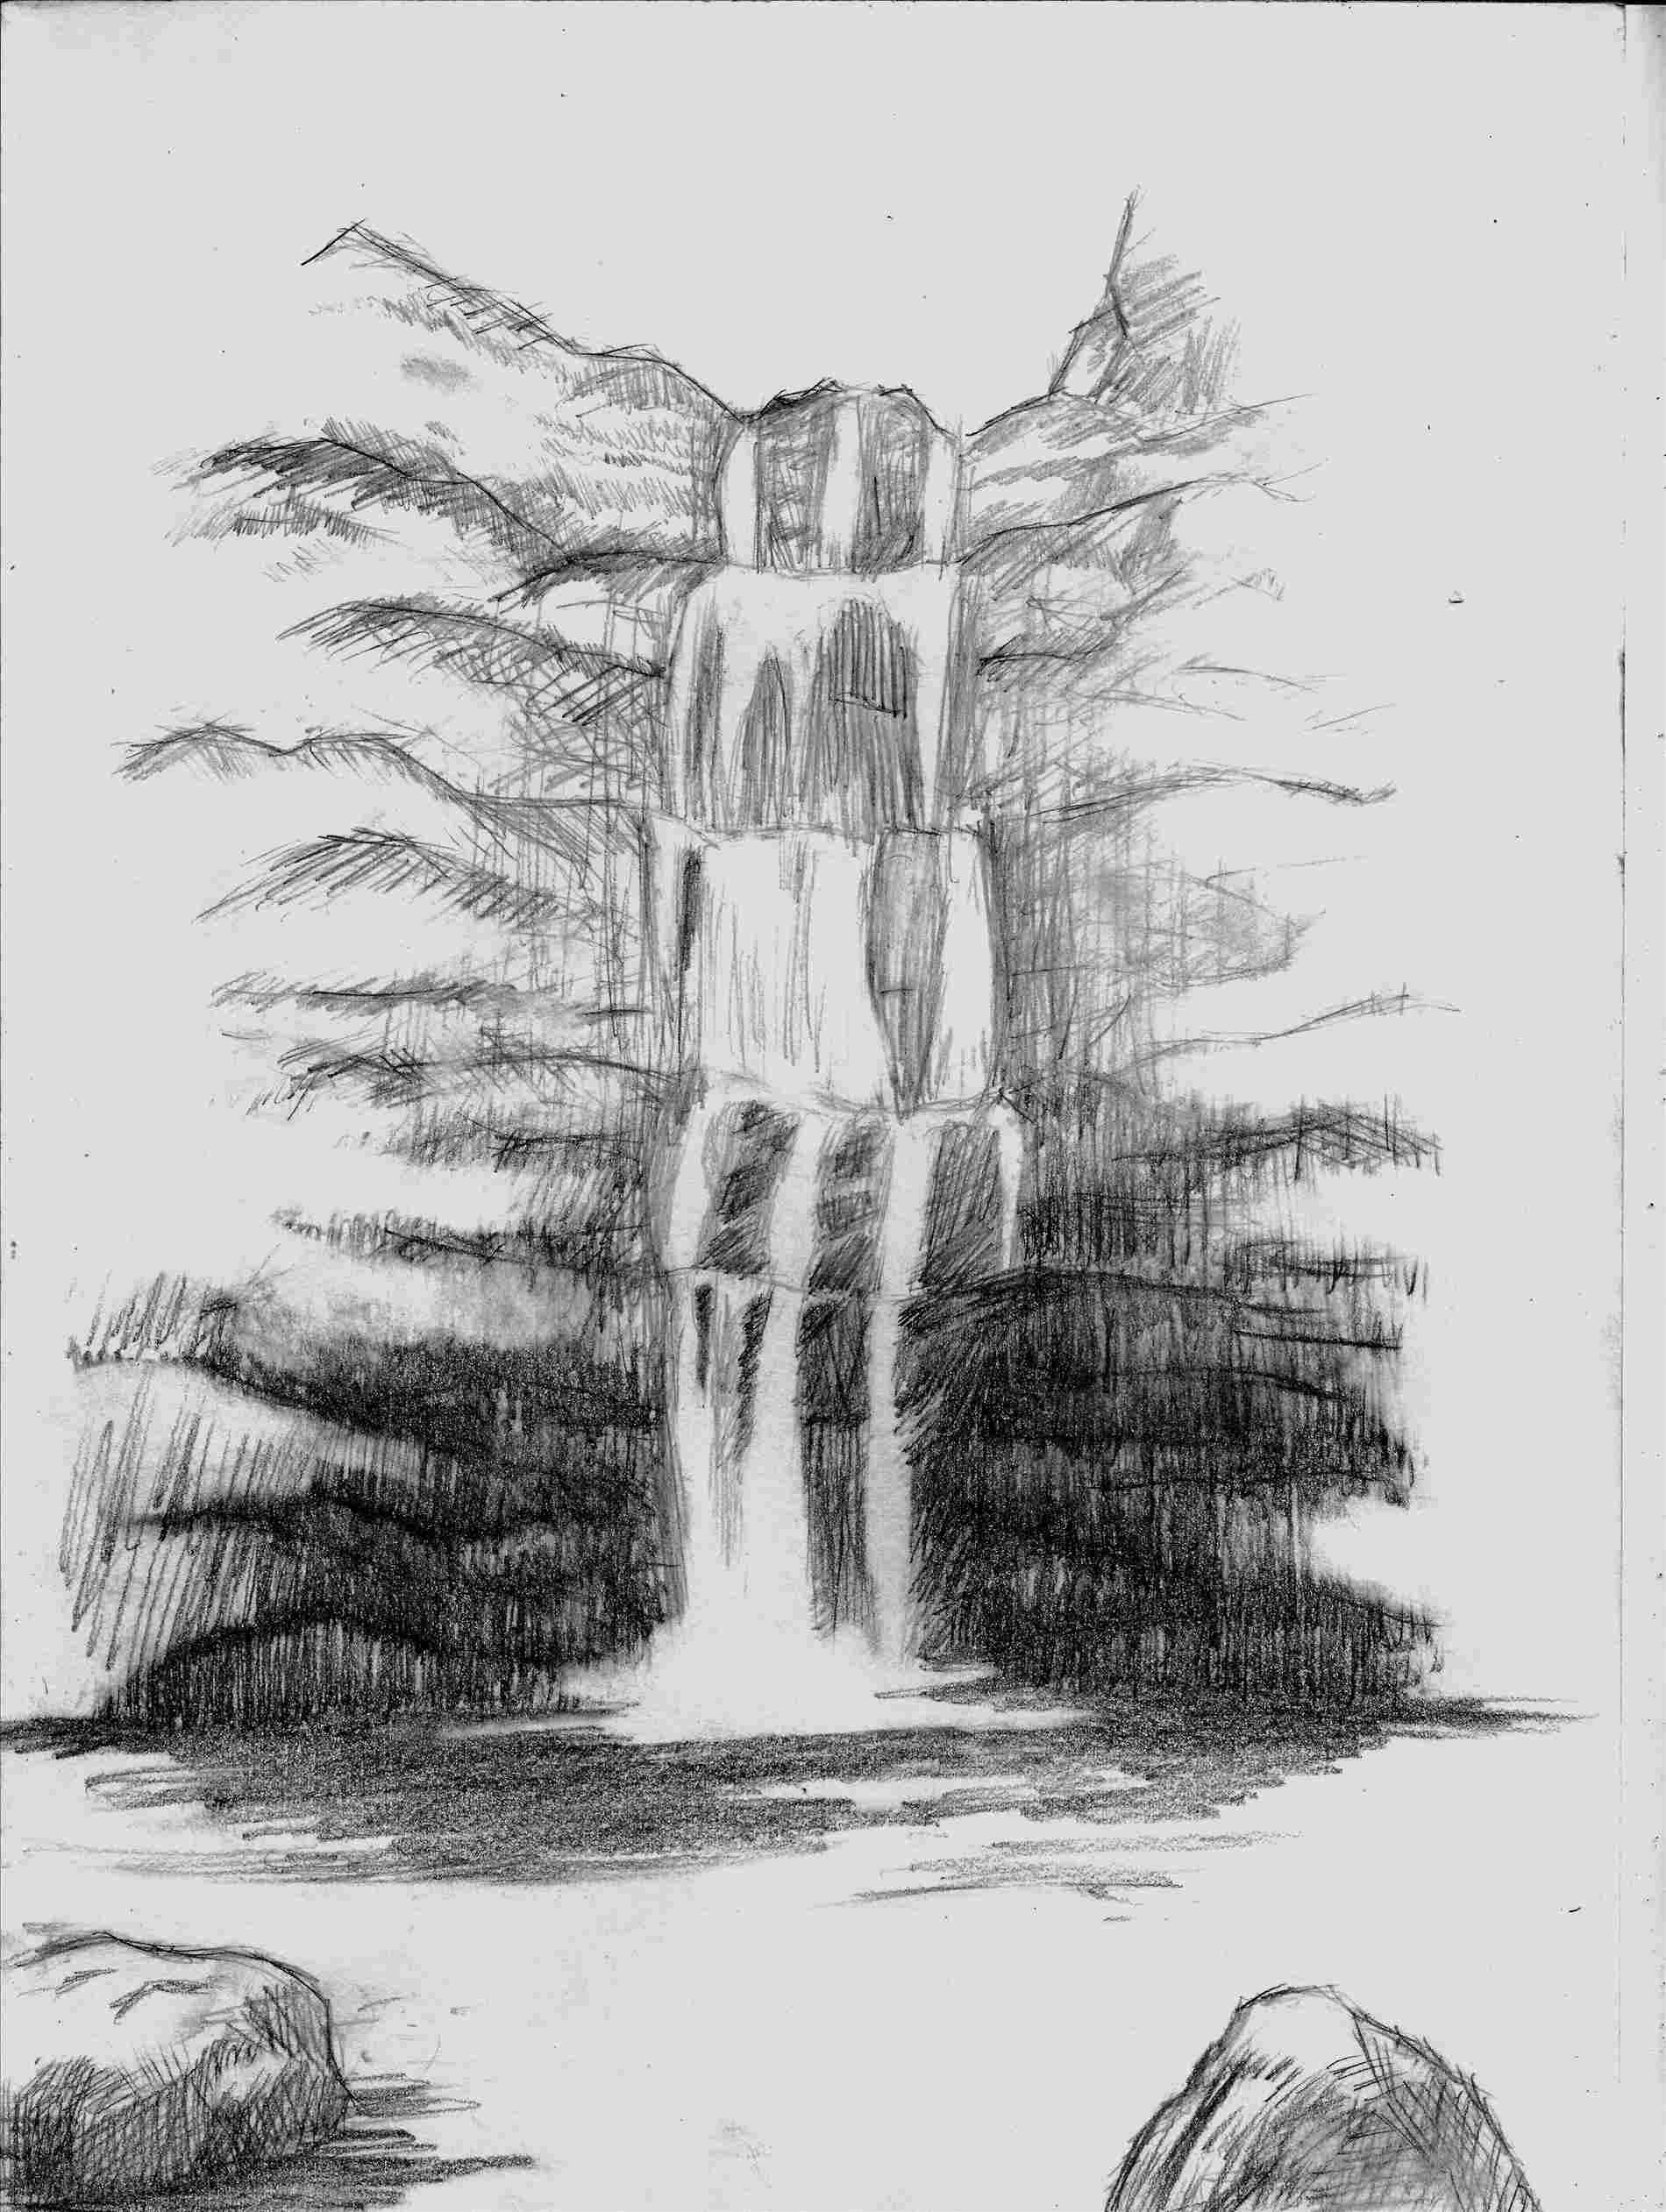 How To Draw A Waterfall Scenery / I had such a good time drawing them